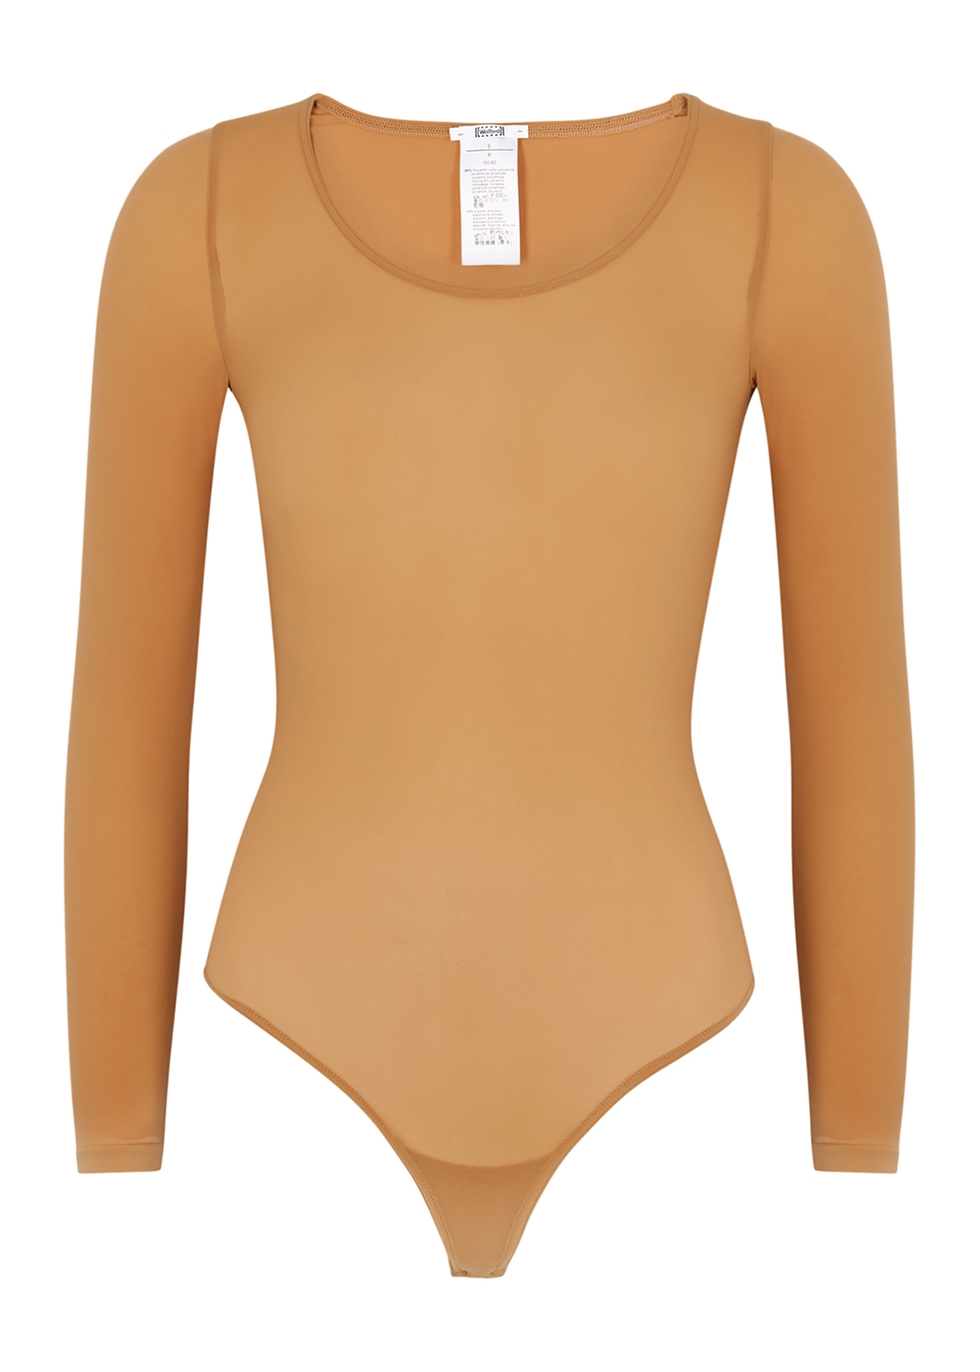 Wolford Buenos Aires caramel bodysuit sale